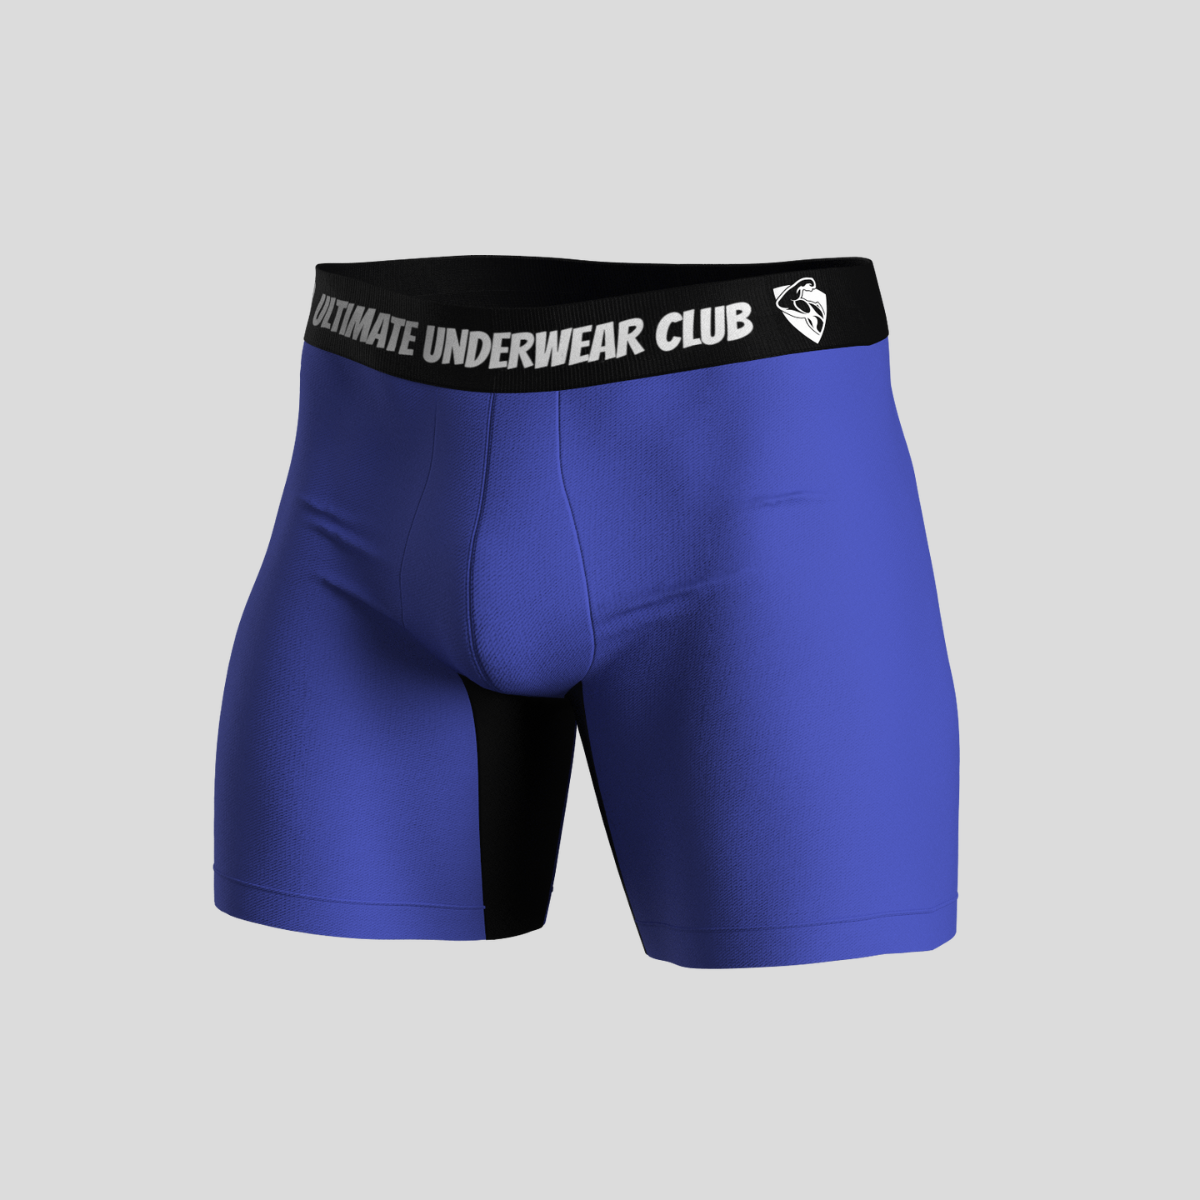 Bamboxers: Affordable luxury men's underwear for REAL people by Bamboxers —  Kickstarter